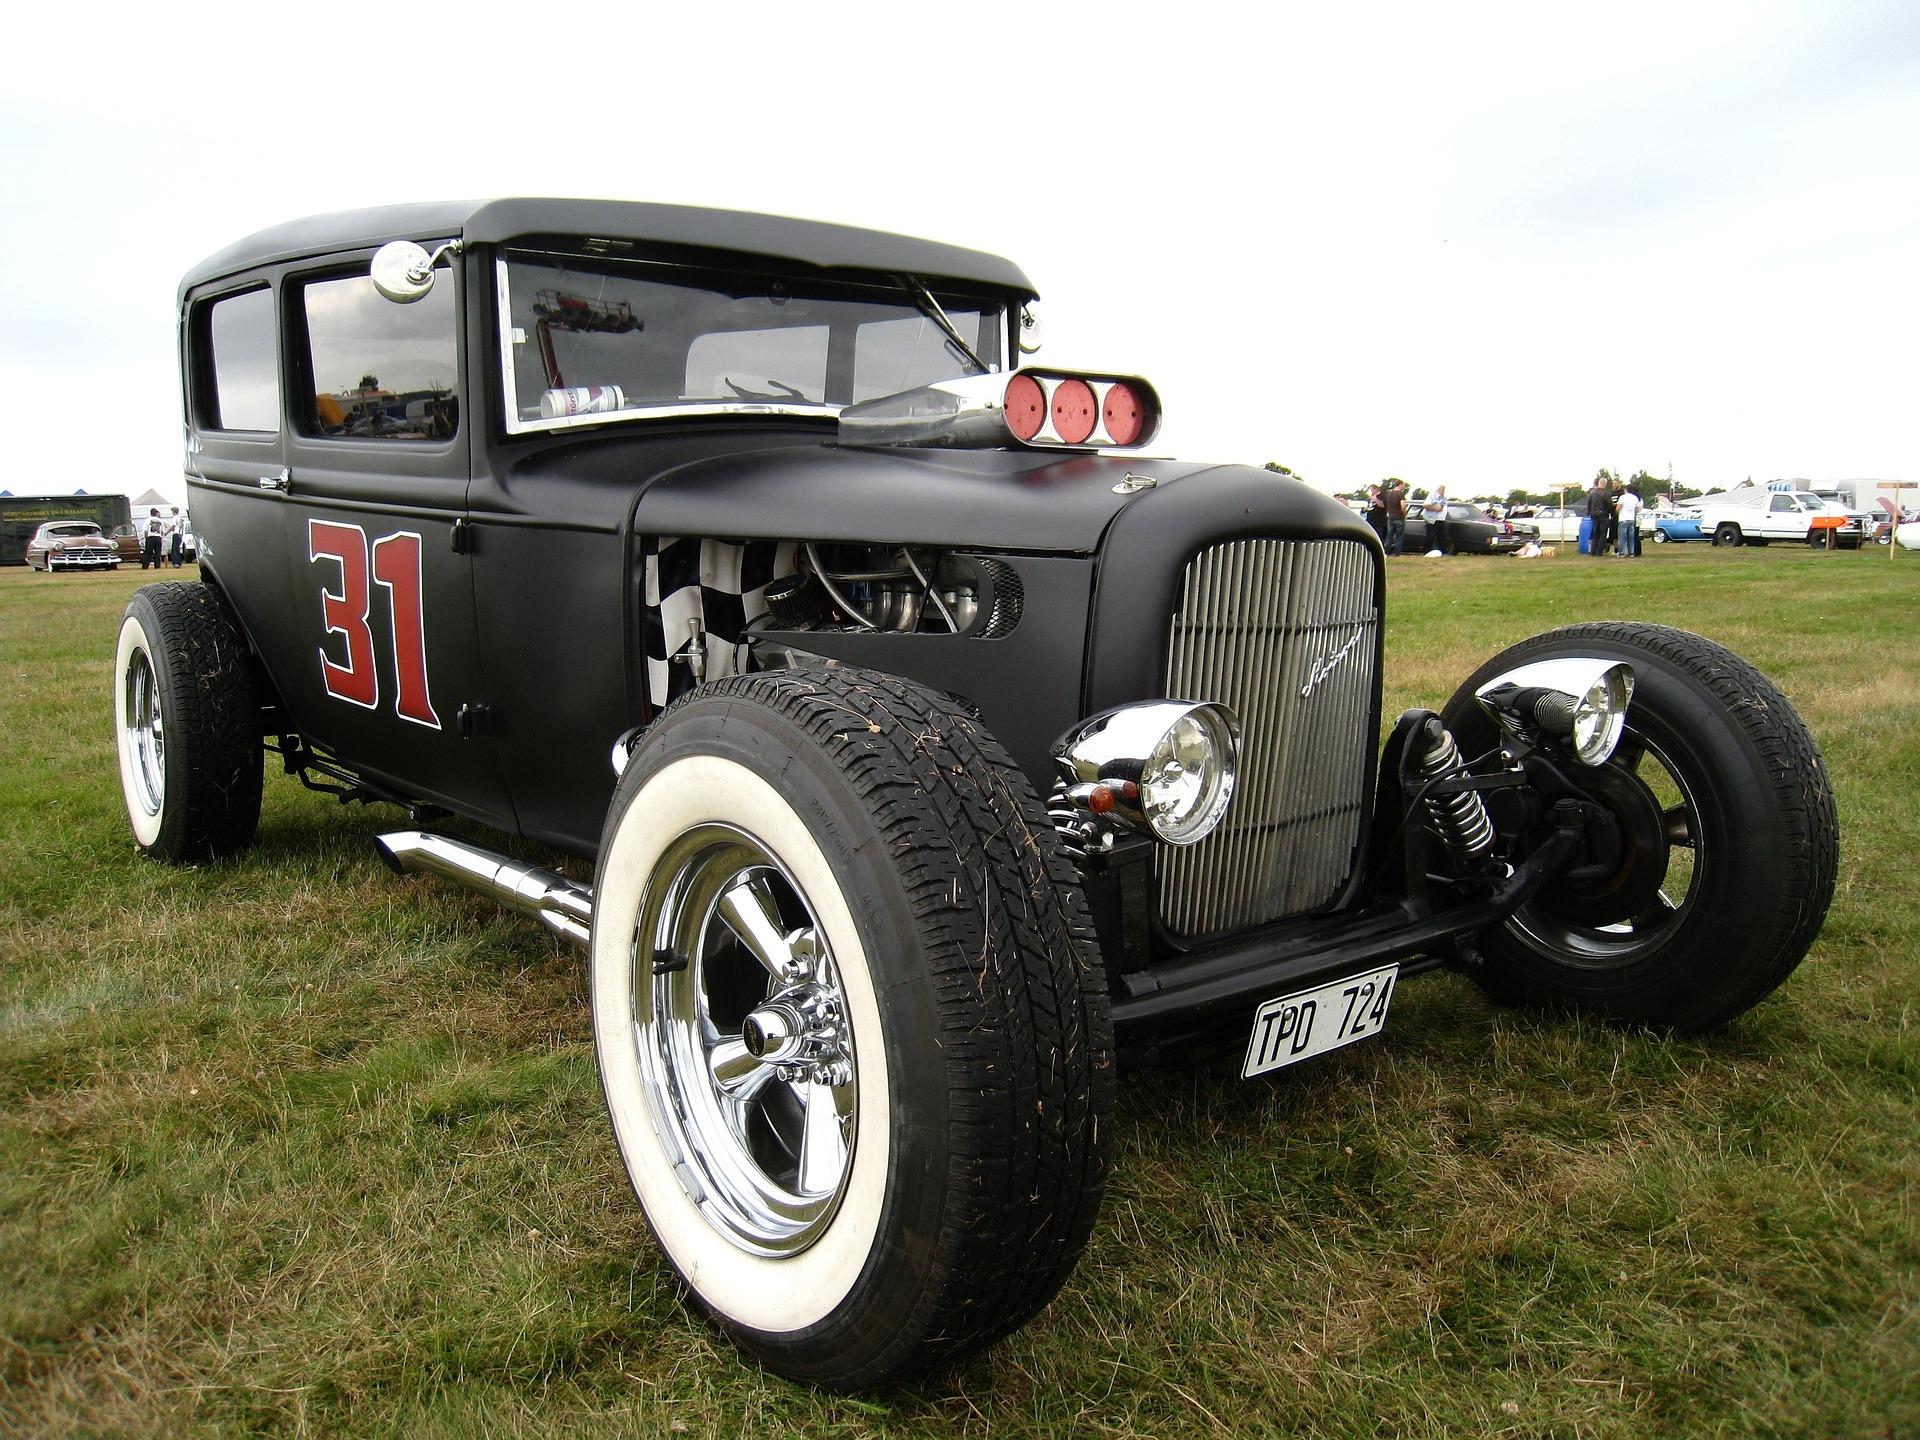 Image of a black classic car with a red number 31